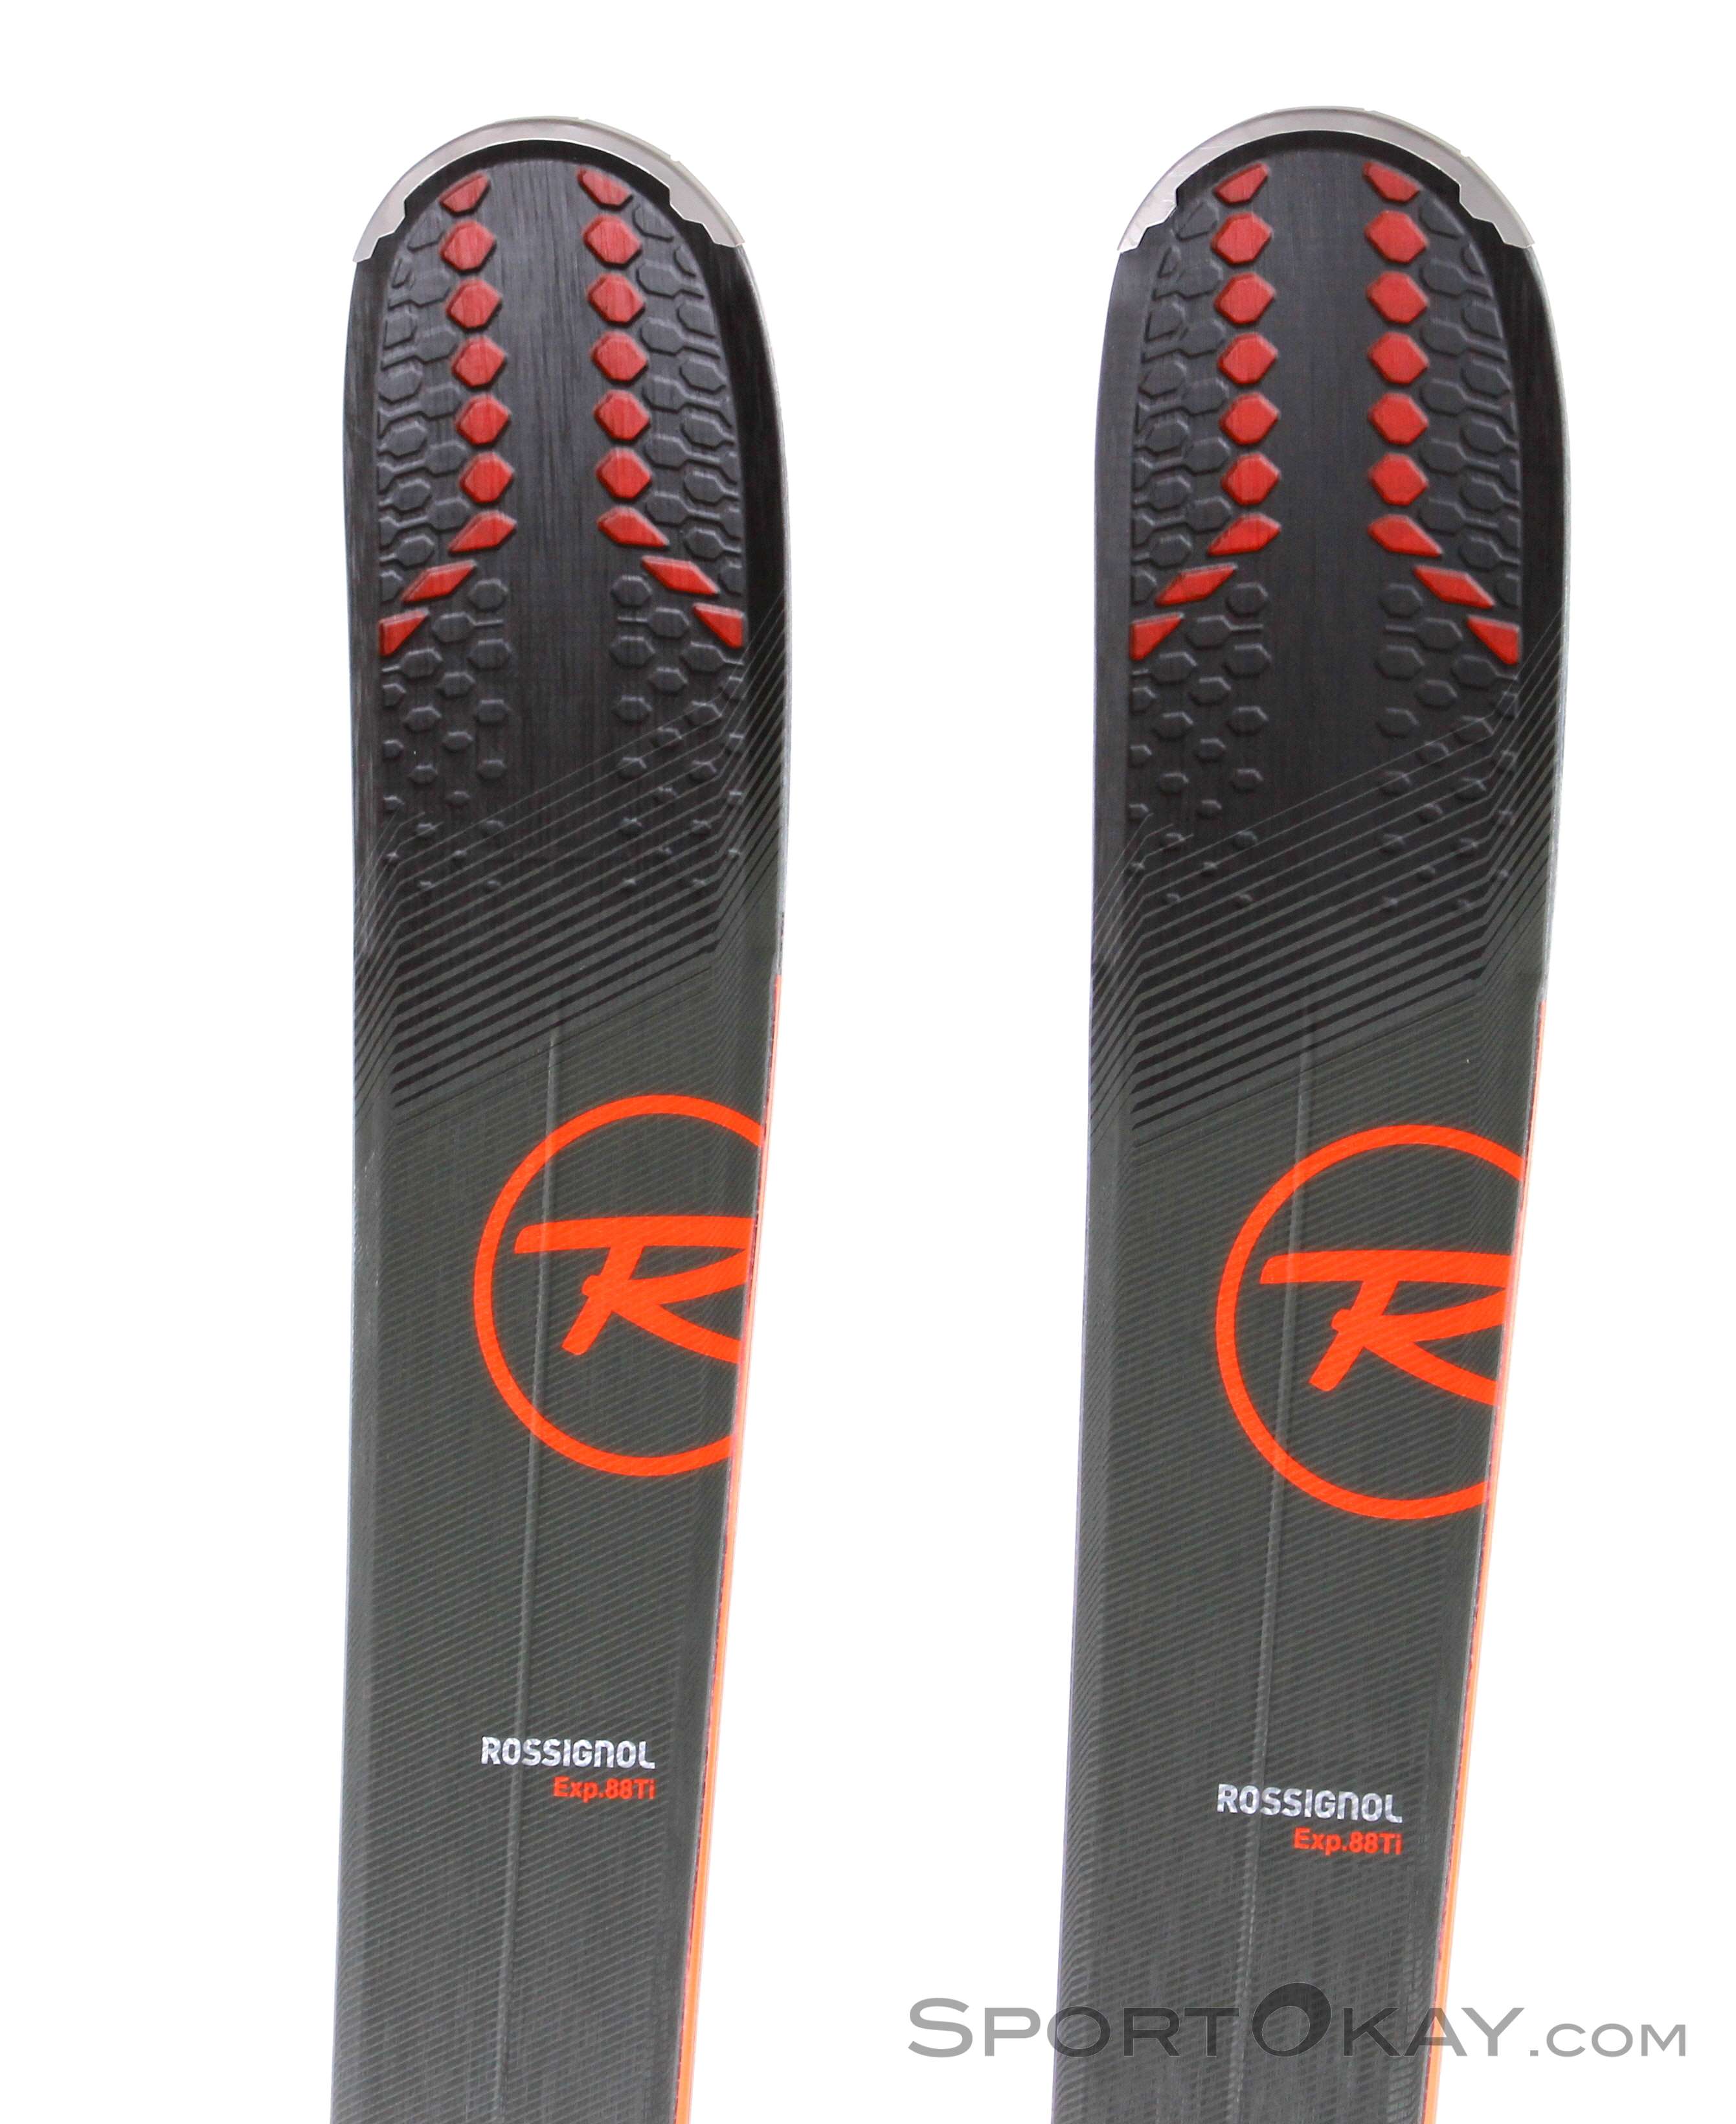 Rossignol Experience 98 Size Chart